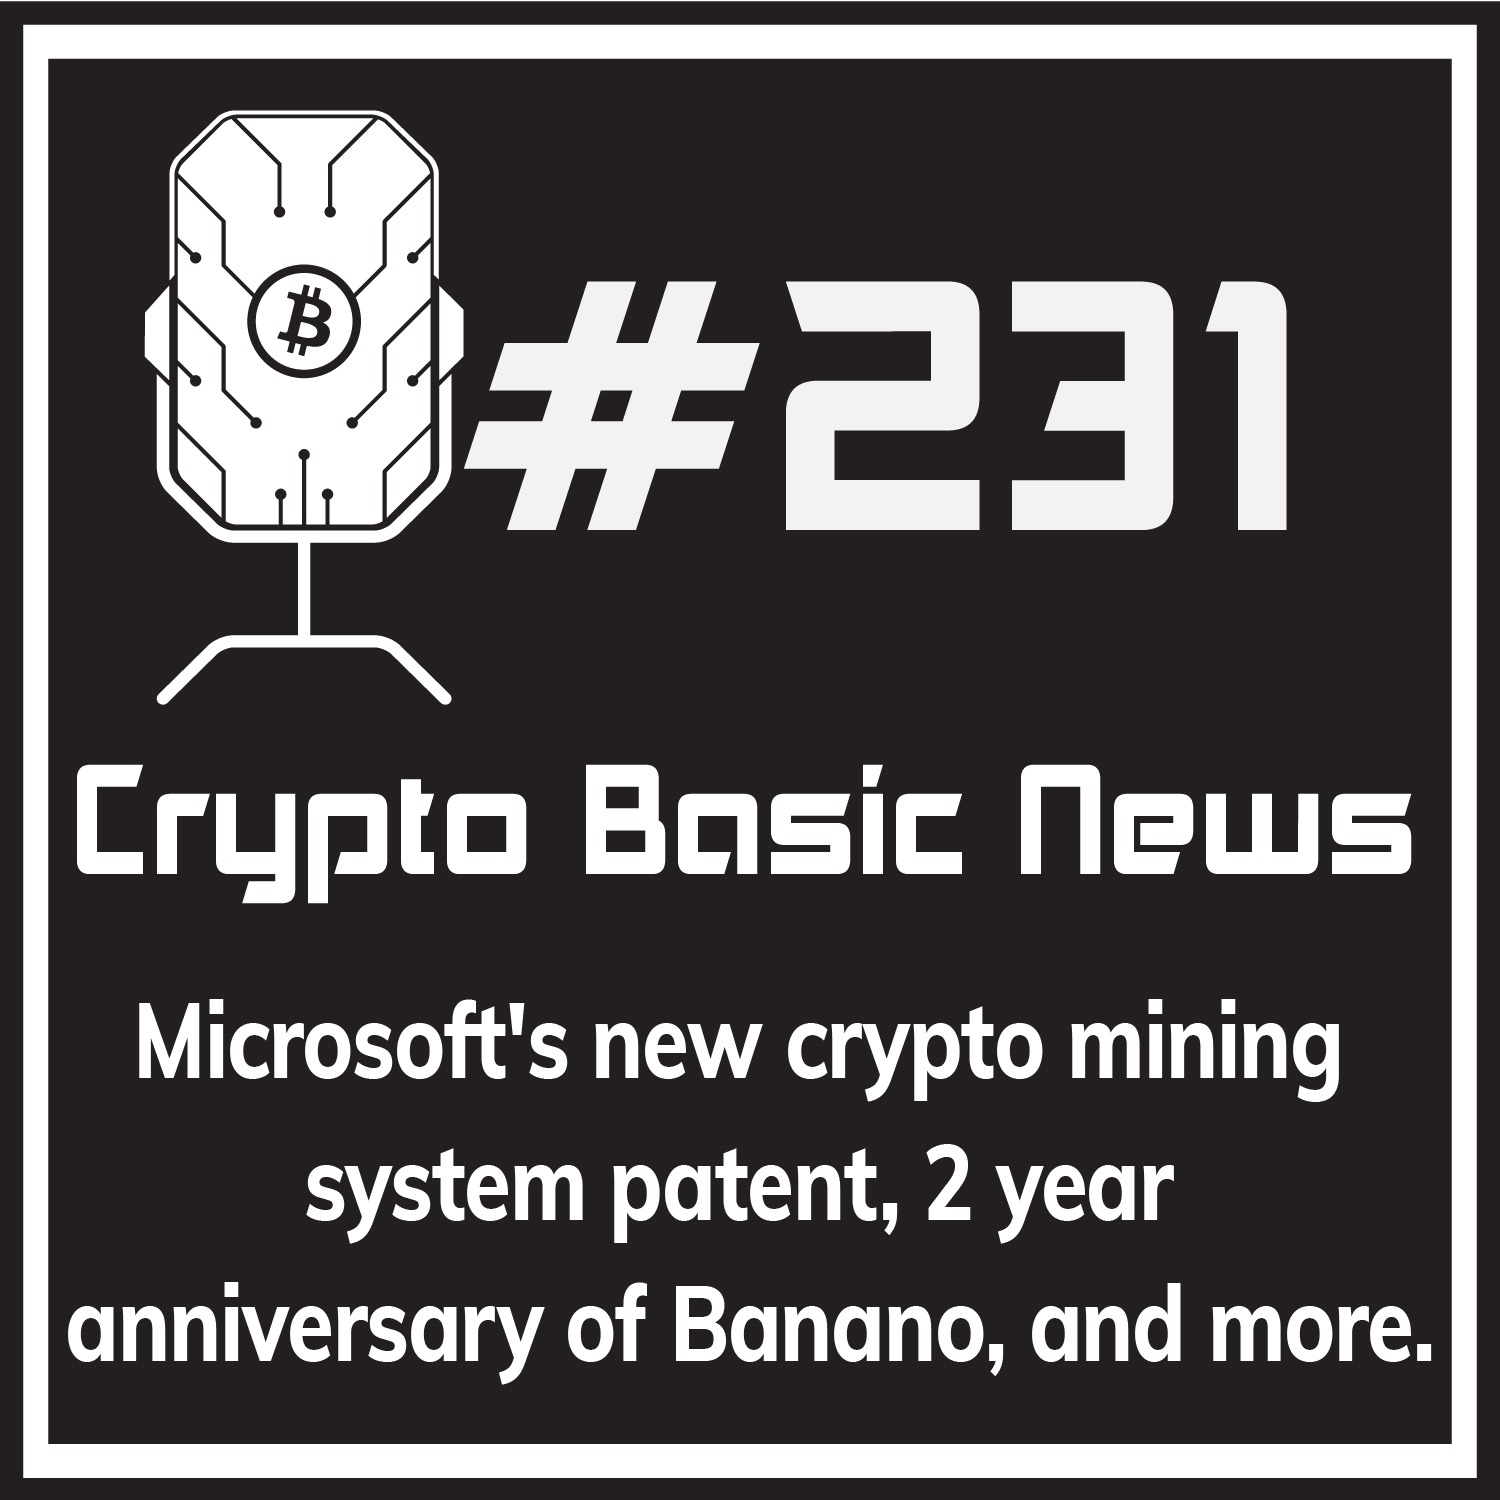 Episode 231 - Microsoft's new crypto mining system patent, 2 year anniversary of Banano, and more.